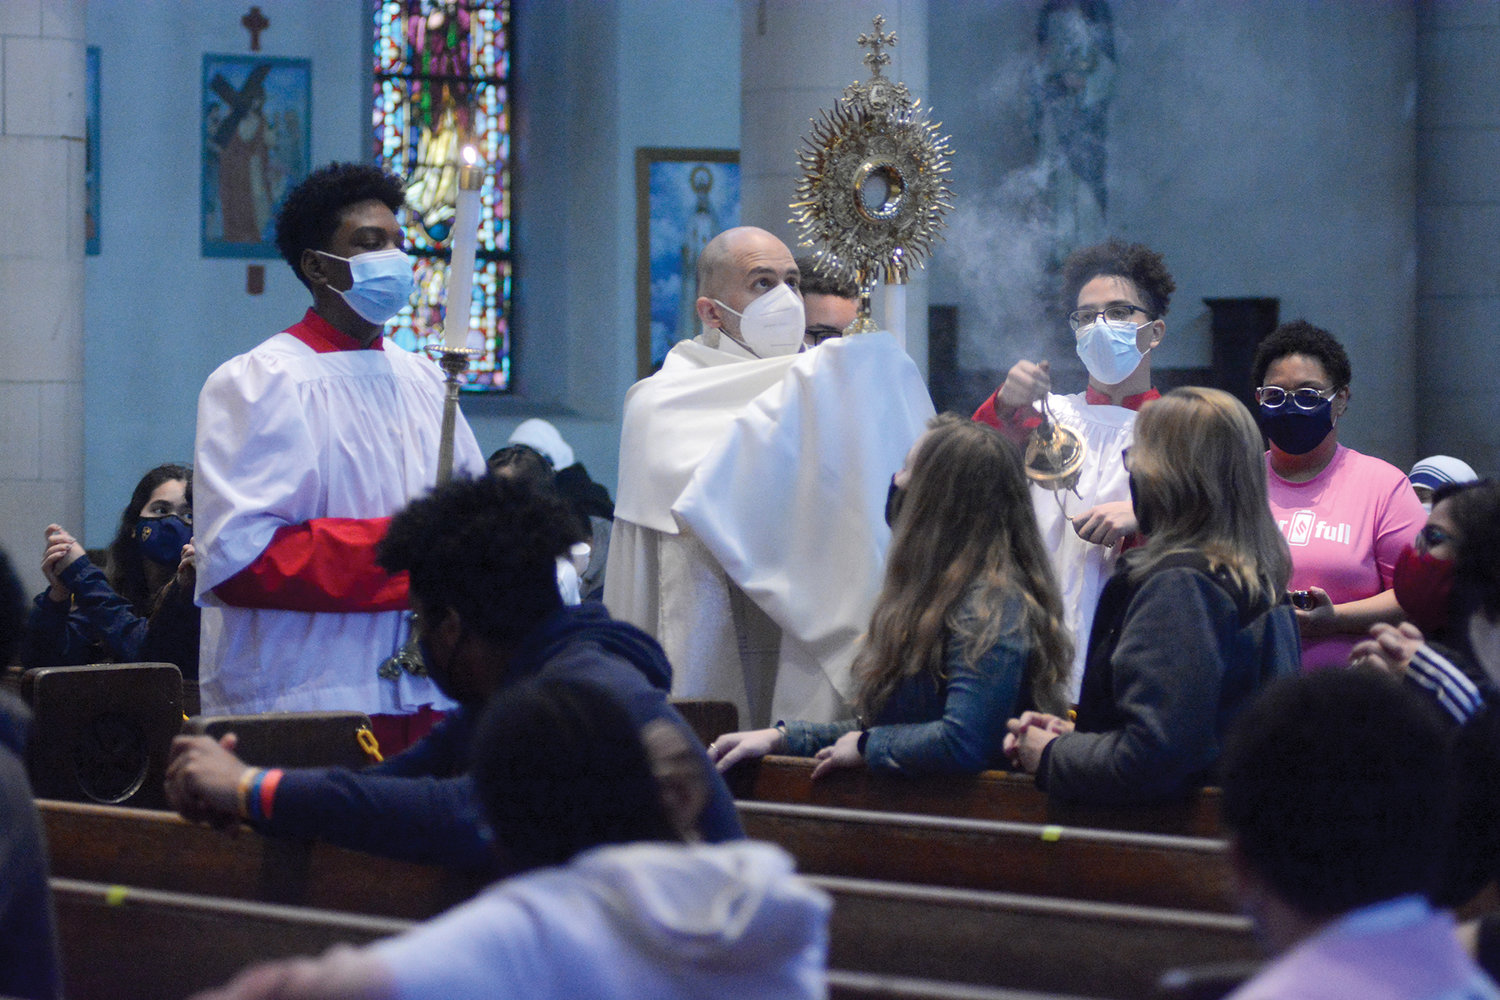 HOLY HOUR—Then-Father Joseph A. Espaillat reverently holds a monstrance during Holy Hour last May at the 2021 New York Catholic Youth Day at St. Anthony of Padua Church in the Bronx, where he is pastor. He spoke to the youths about the importance of seeing the Light of Christ.